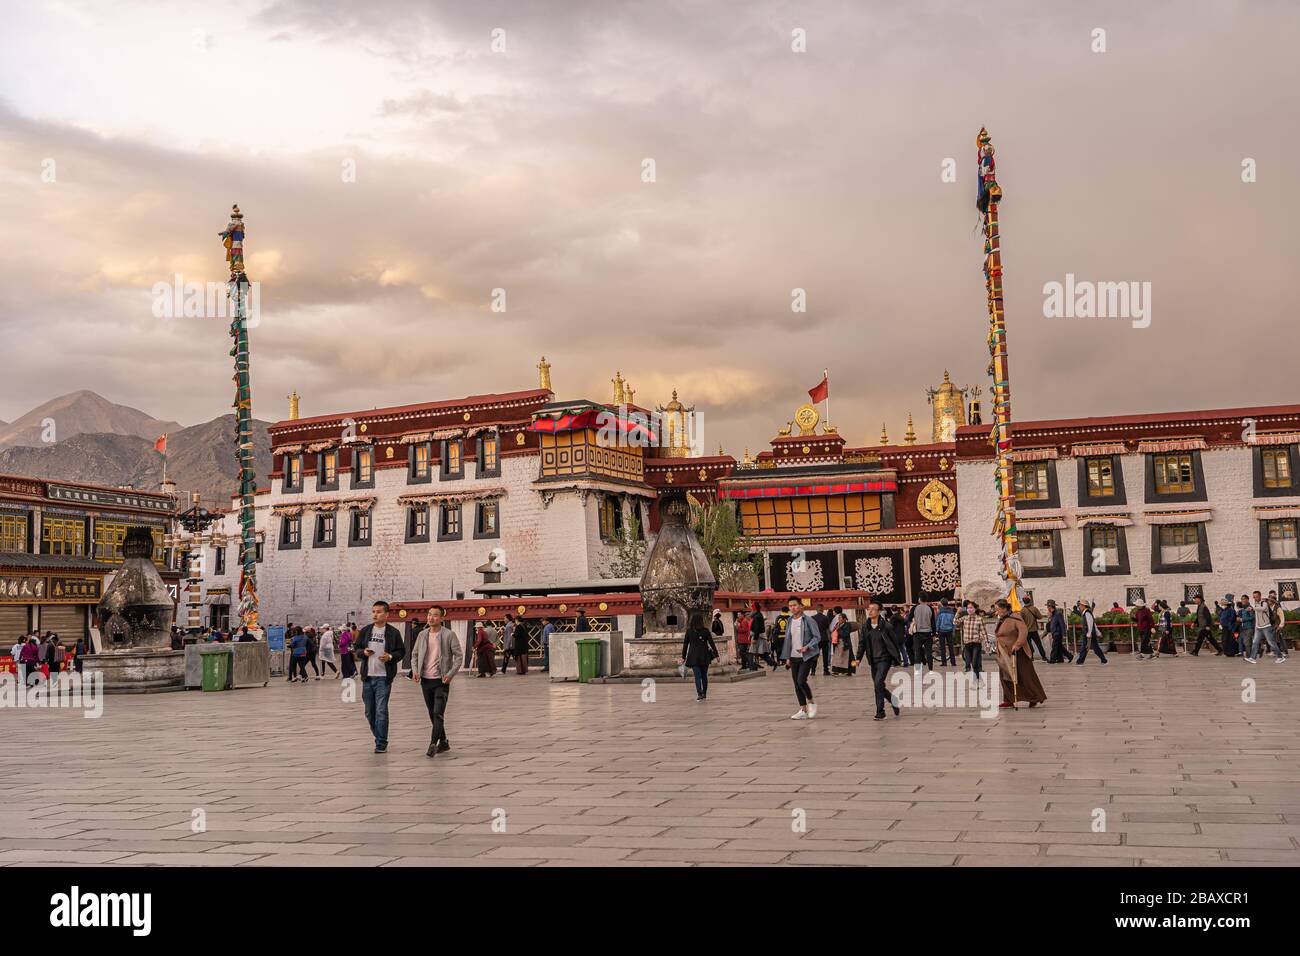 'English: Jokhang on 28 May 2019 The Jokhang  Temple, Jokhang Monastery is a Buddhist temple in Barkhor Square in Lhasa, the capital city of Tibet. Tibetans, in general, consider this temple as the most sacred and important temple in Tibet. The temple is currently maintained by the Gelug school, but they accept worshipers from all sects of Buddhism. The temple's architectural style is a mixture of Indian vihara design, Tibetan and Nepalese design.   During the Cultural Revolution, Red Guards attacked the Jokhang temple in 1966 and for a decade there was no worship. Renovation of the Jokhang to Stock Photo